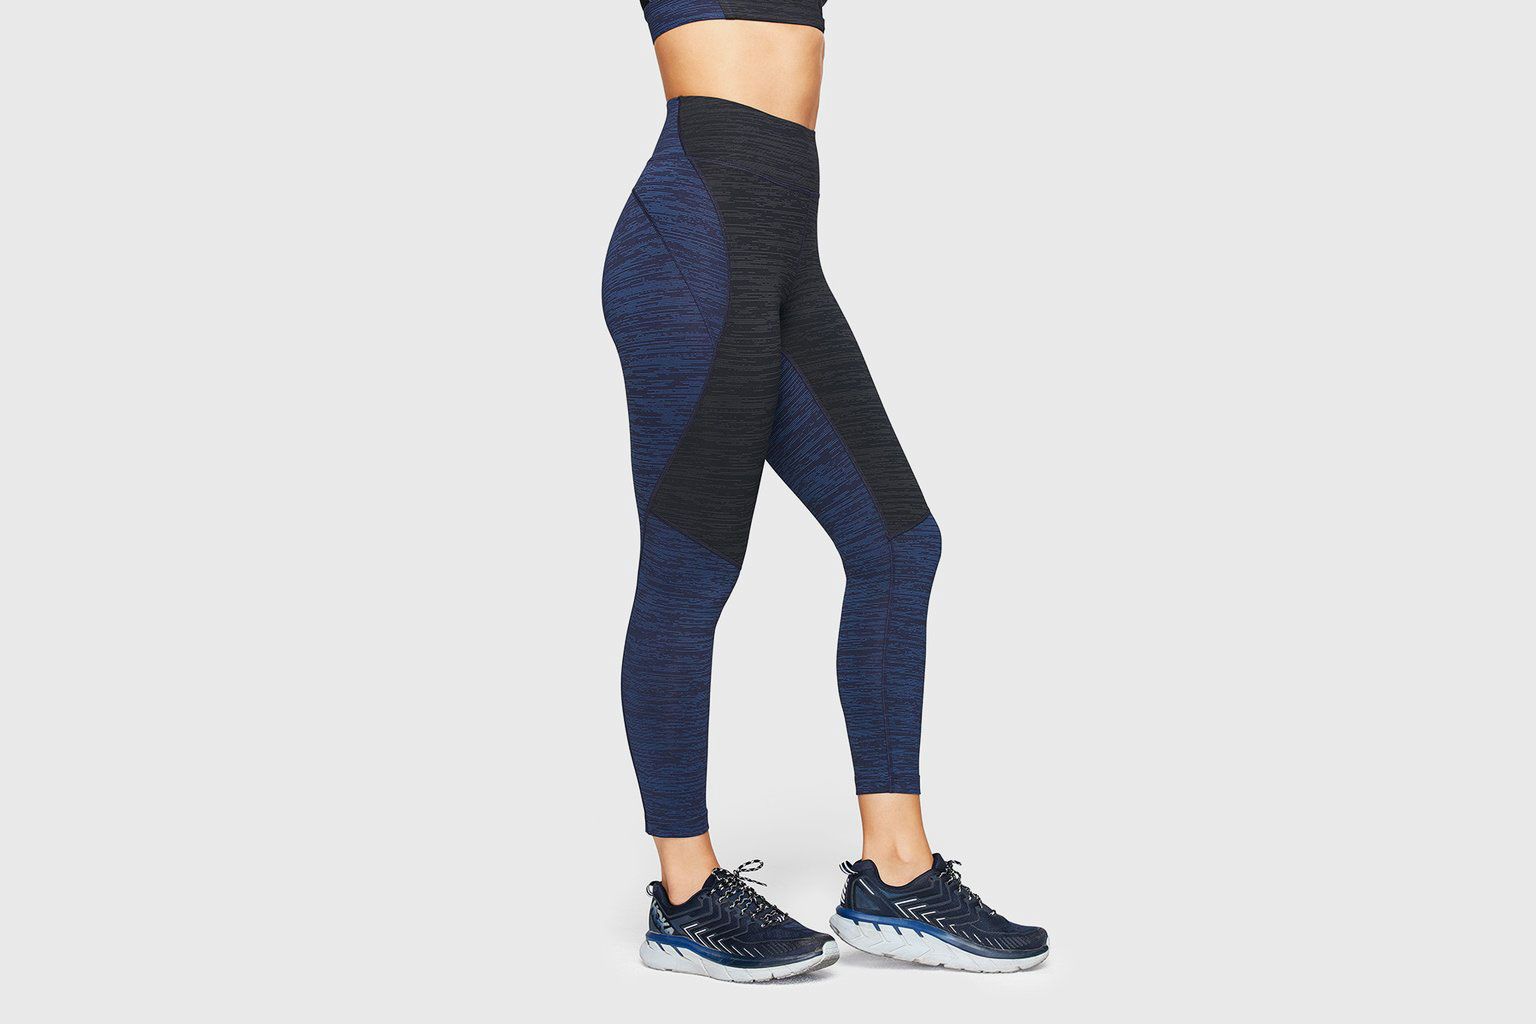 Outdoor Voices S Navy Blue Warm Up Leggings